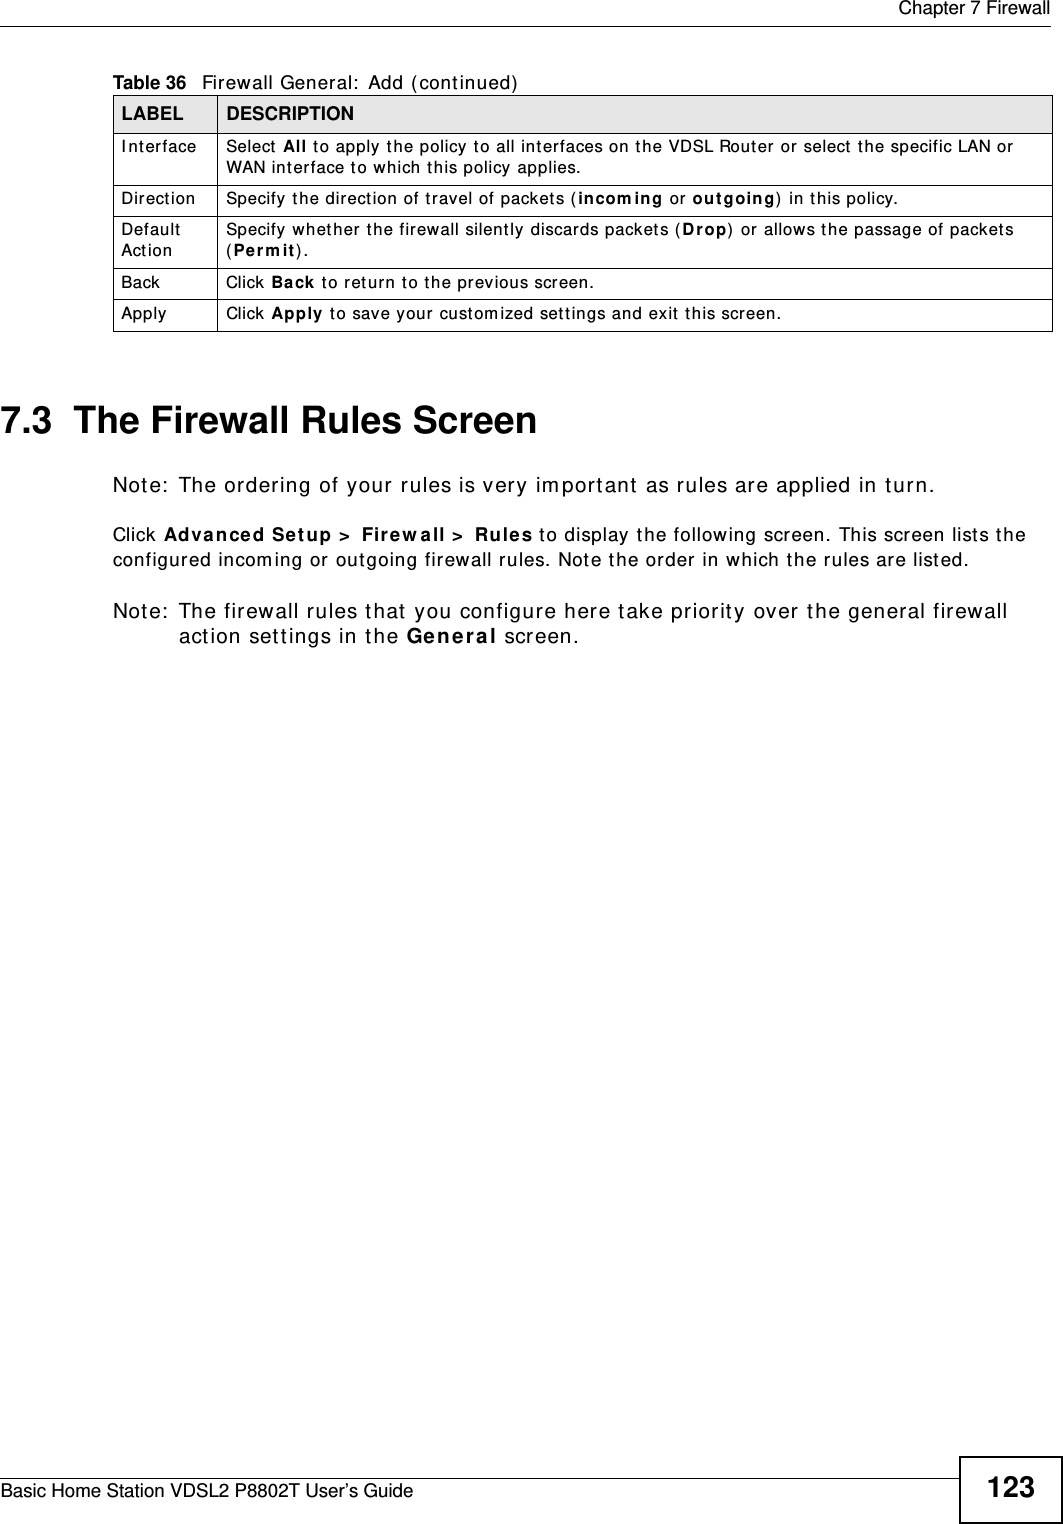  Chapter 7 FirewallBasic Home Station VDSL2 P8802T User’s Guide 1237.3  The Firewall Rules ScreenNote:  The ordering of your rules is very im port ant as rules are applied in turn.Click Advan ce d Setup &gt;  Firew all &gt;  Rules t o display the following screen. This screen list s the configured incom ing or out going firewall rules. Note the order in which t he rules are list ed.Note:  The firewall rules t hat you configure here take priority over the general firewall act ion settings in the Ge neral screen.I nterface Select  All to apply the policy to all interfaces on the VDSL Rout er  or select the specific LAN or  WAN int er face to which this policy applies. Direction Specify the direct ion of travel of packet s ( in com ing or  out going)  in this policy.Default  Act ionSpecify whet her t he firewall silently discards packet s (D rop) or allows the passage of packet s (Per m i t ) .Back Click Ba ck  to ret urn t o the previous screen.Apply Click Apply to save your cust om ized sett ings and exit this screen.Table 36   Firewall General:  Add ( continued)LABEL DESCRIPTION